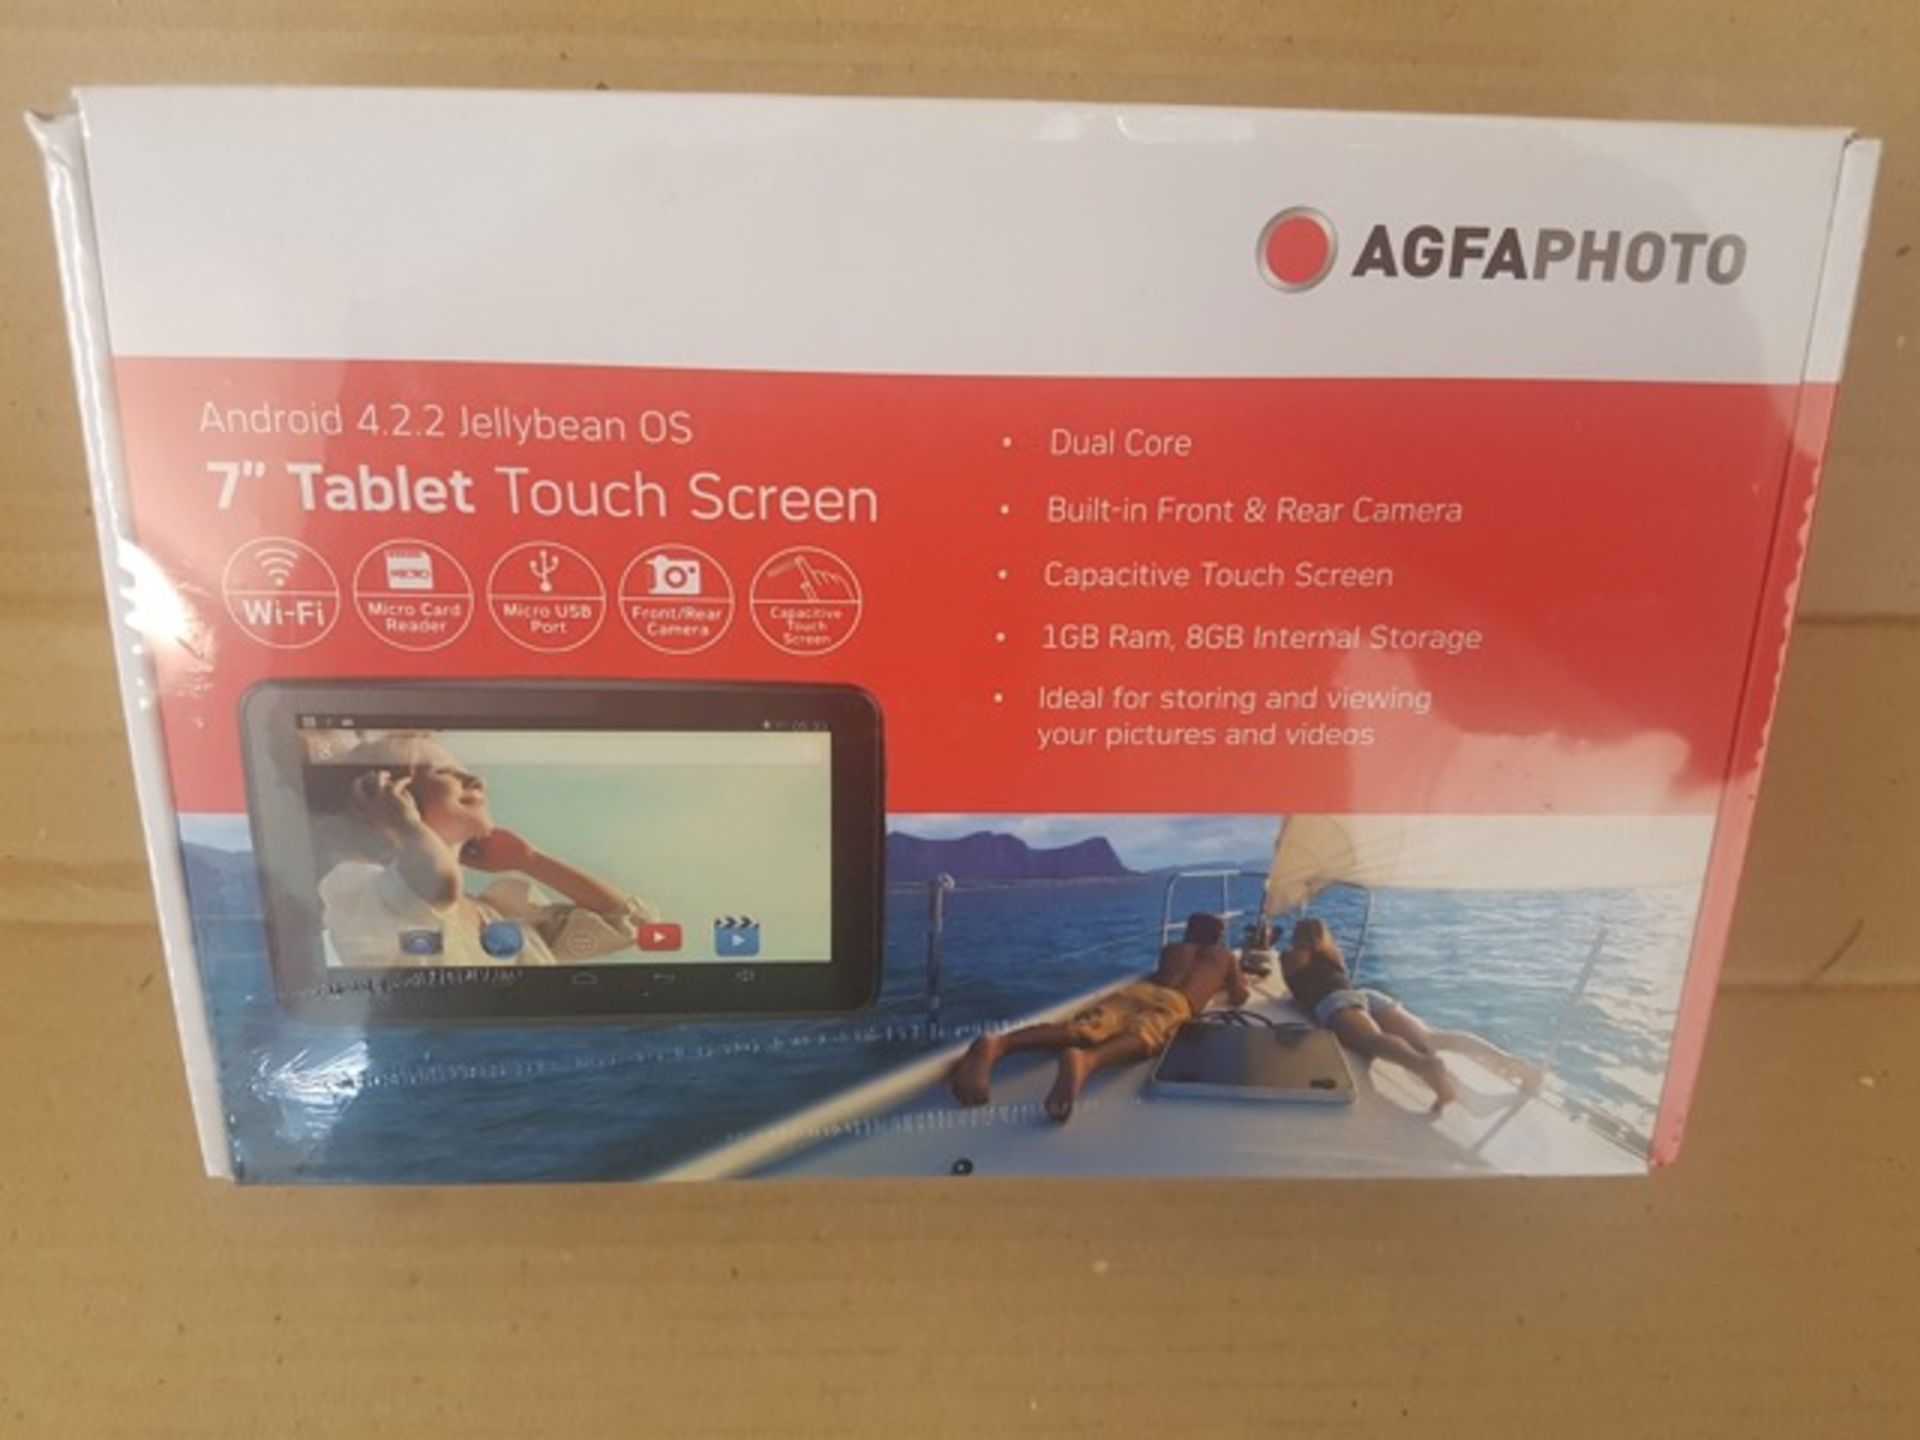 3 x Brand New Agfaphoto 7 Inch Tablet Touch Screen. Android 4.2.2 Jellybean OS. Dual Core, Built